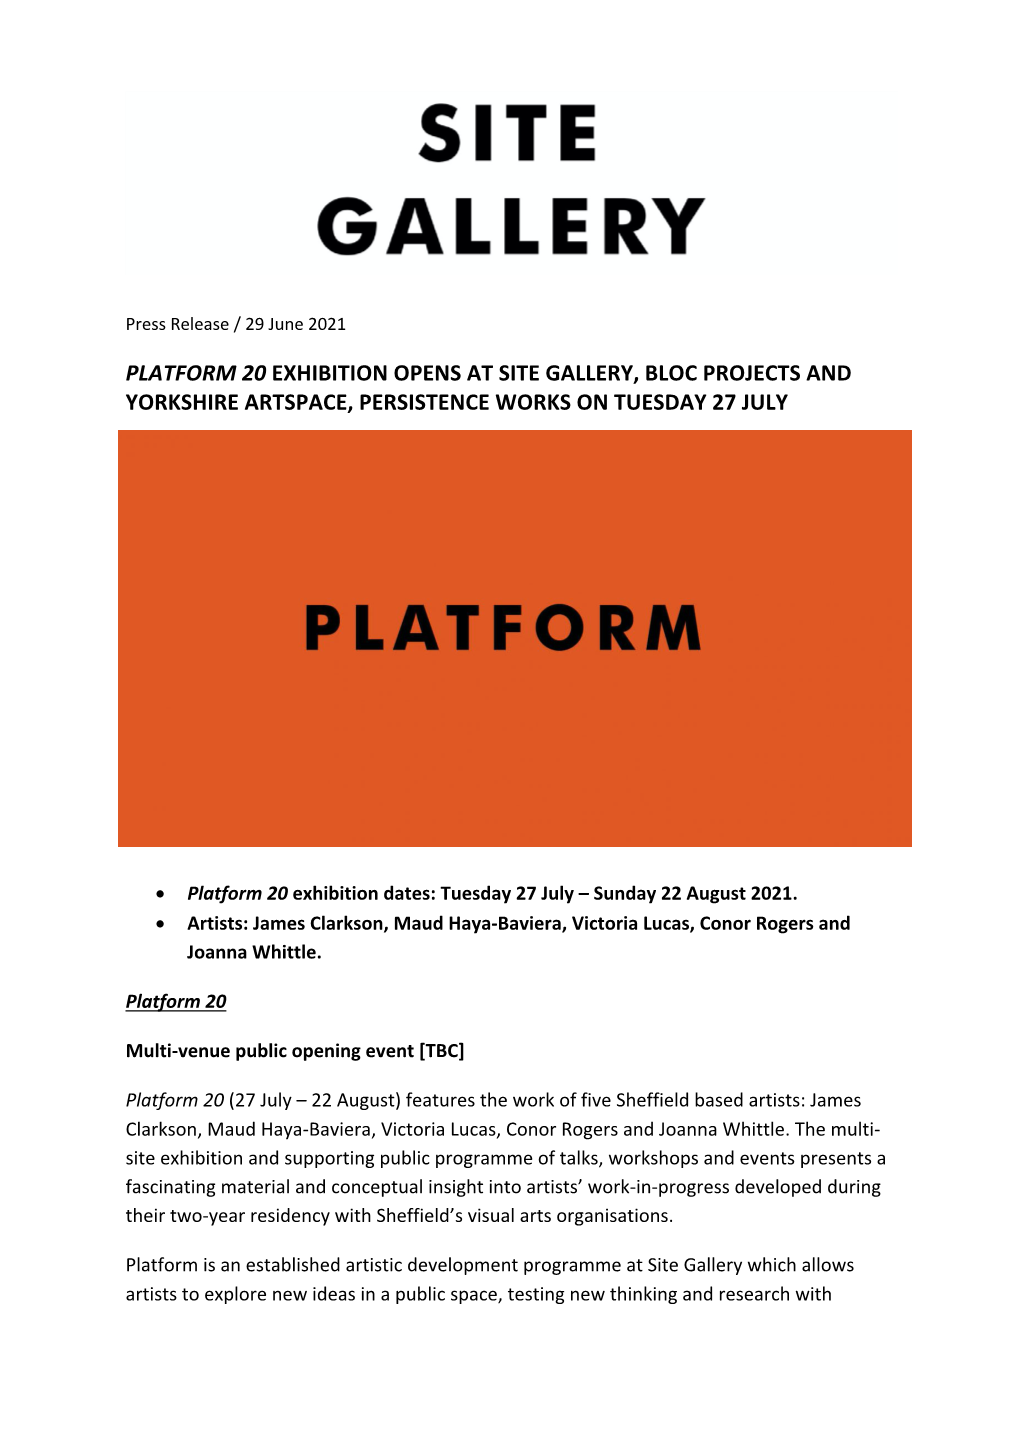 Introducing PLATFORM: a Returning Multi-Venue Exhibition Featuring the Work of Five Sheffield Based Artists